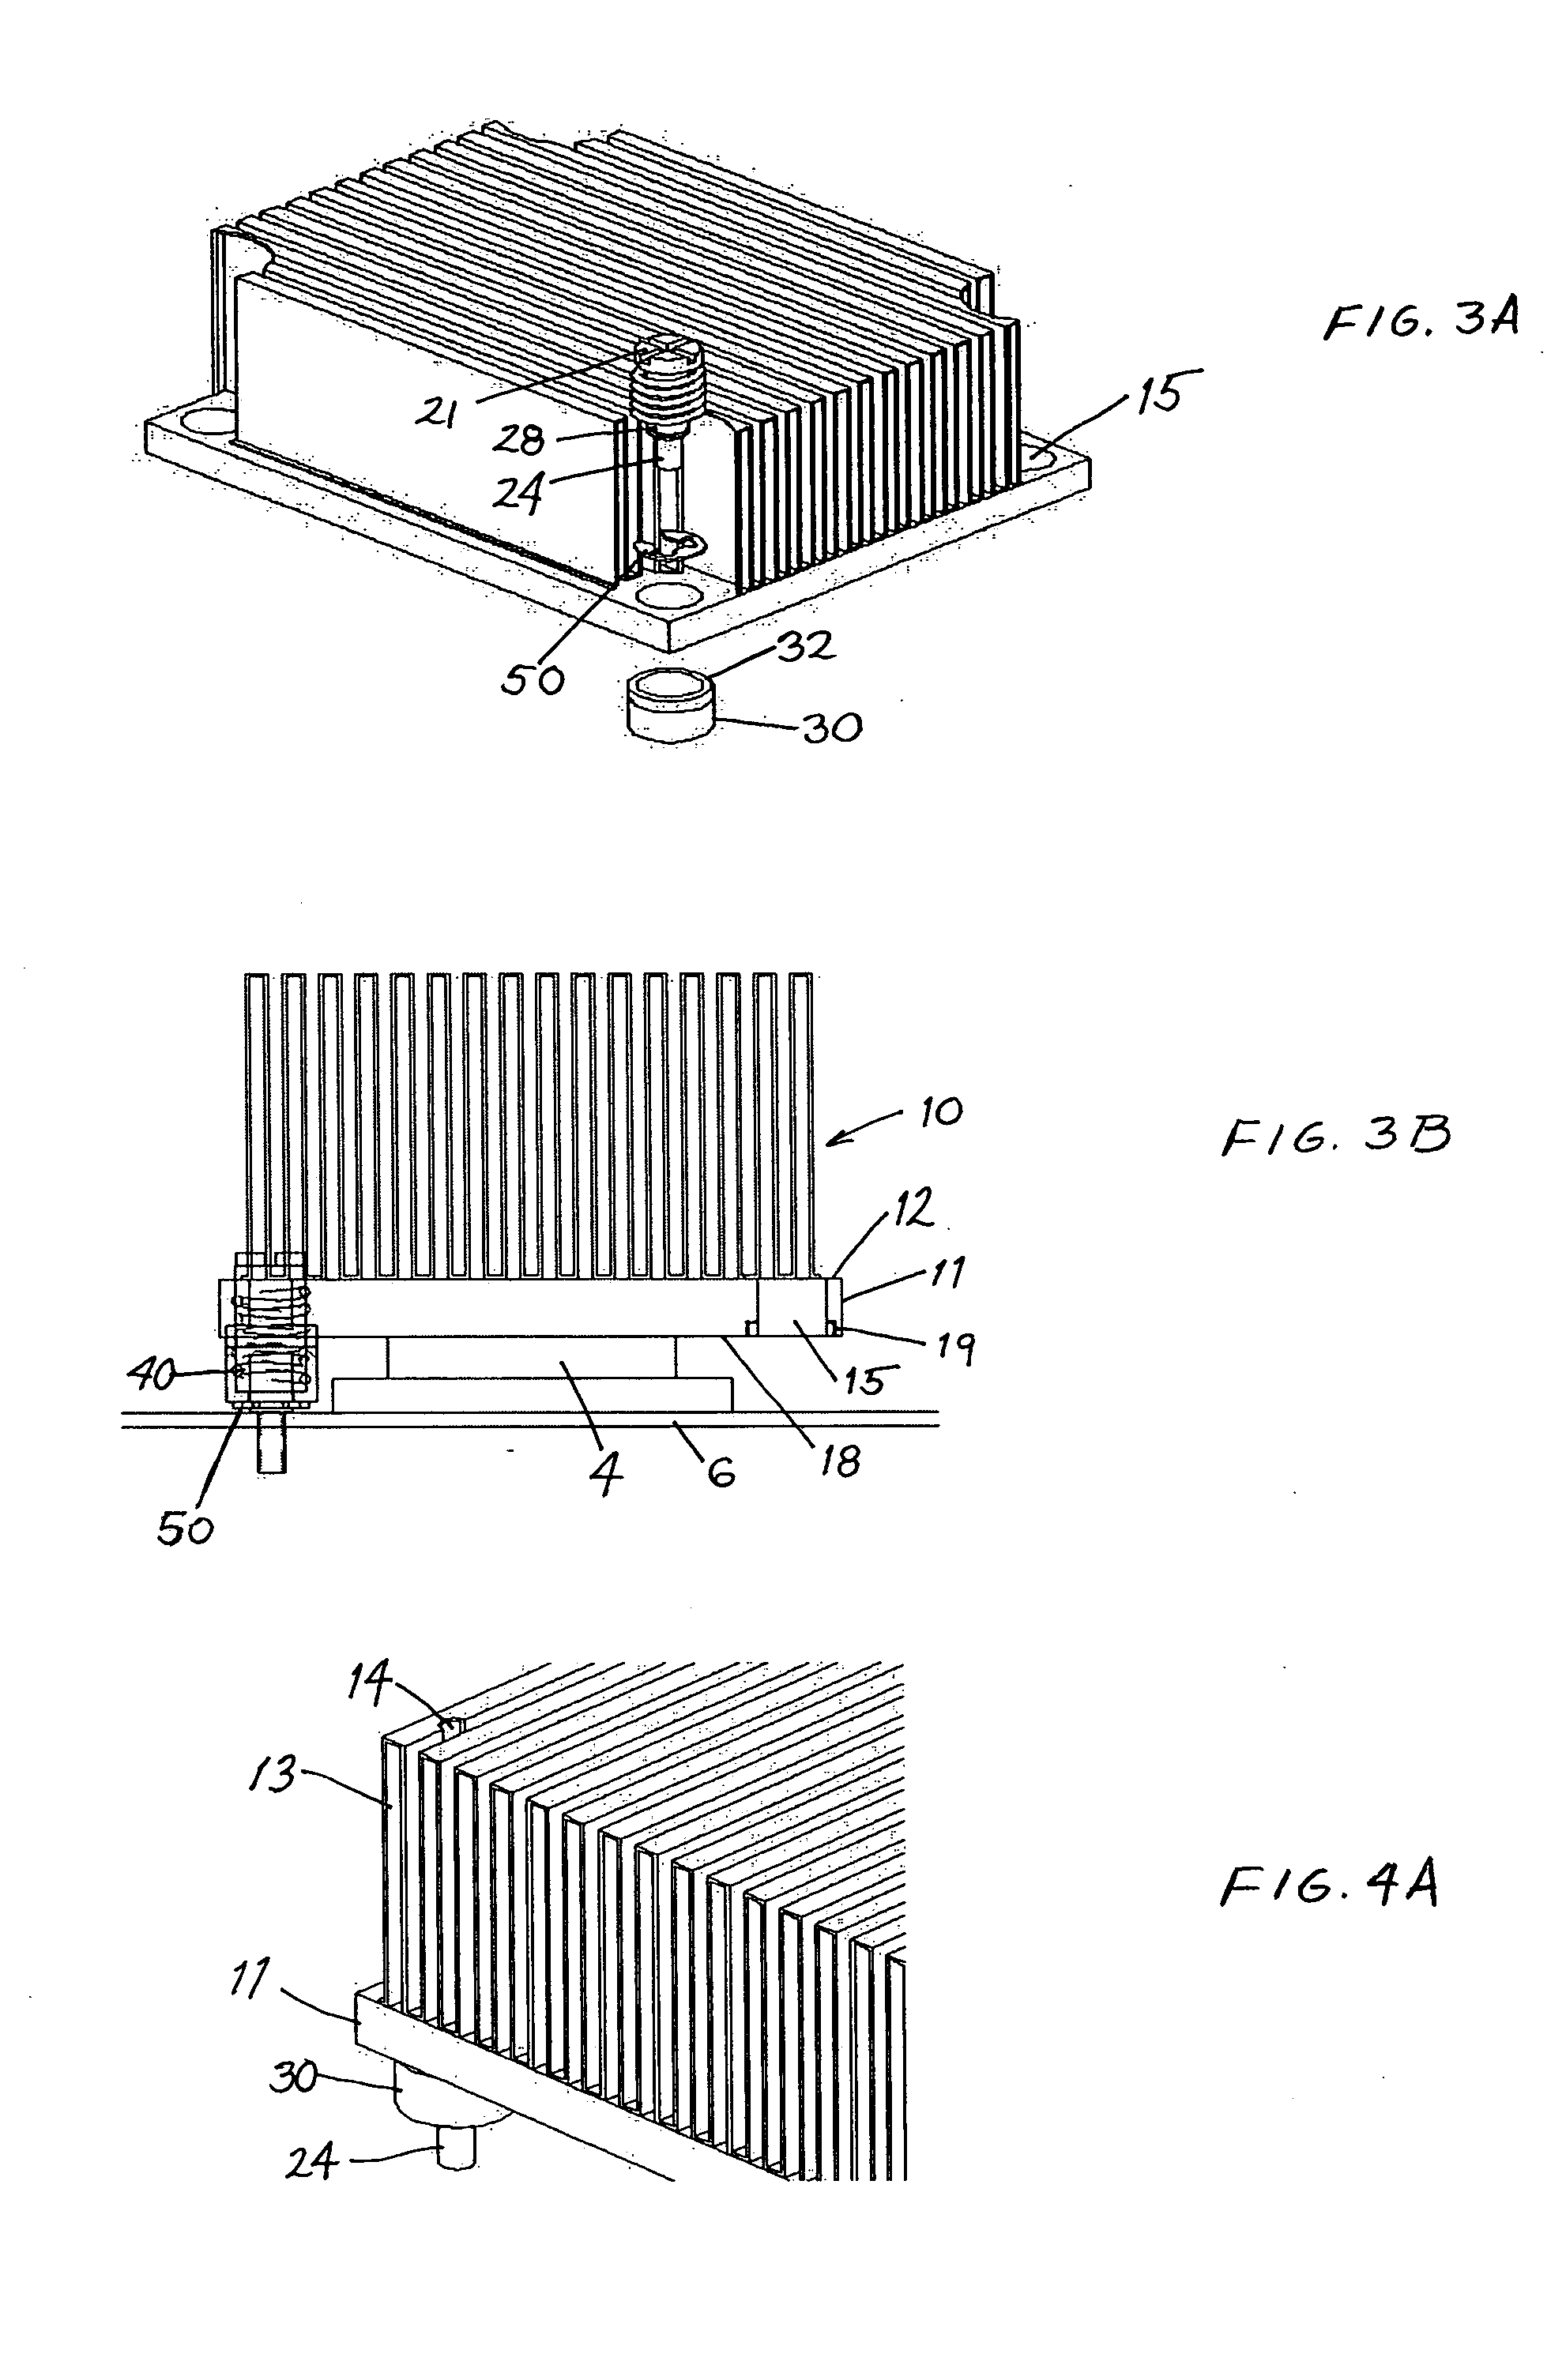 Heat sink assembly and connecting device